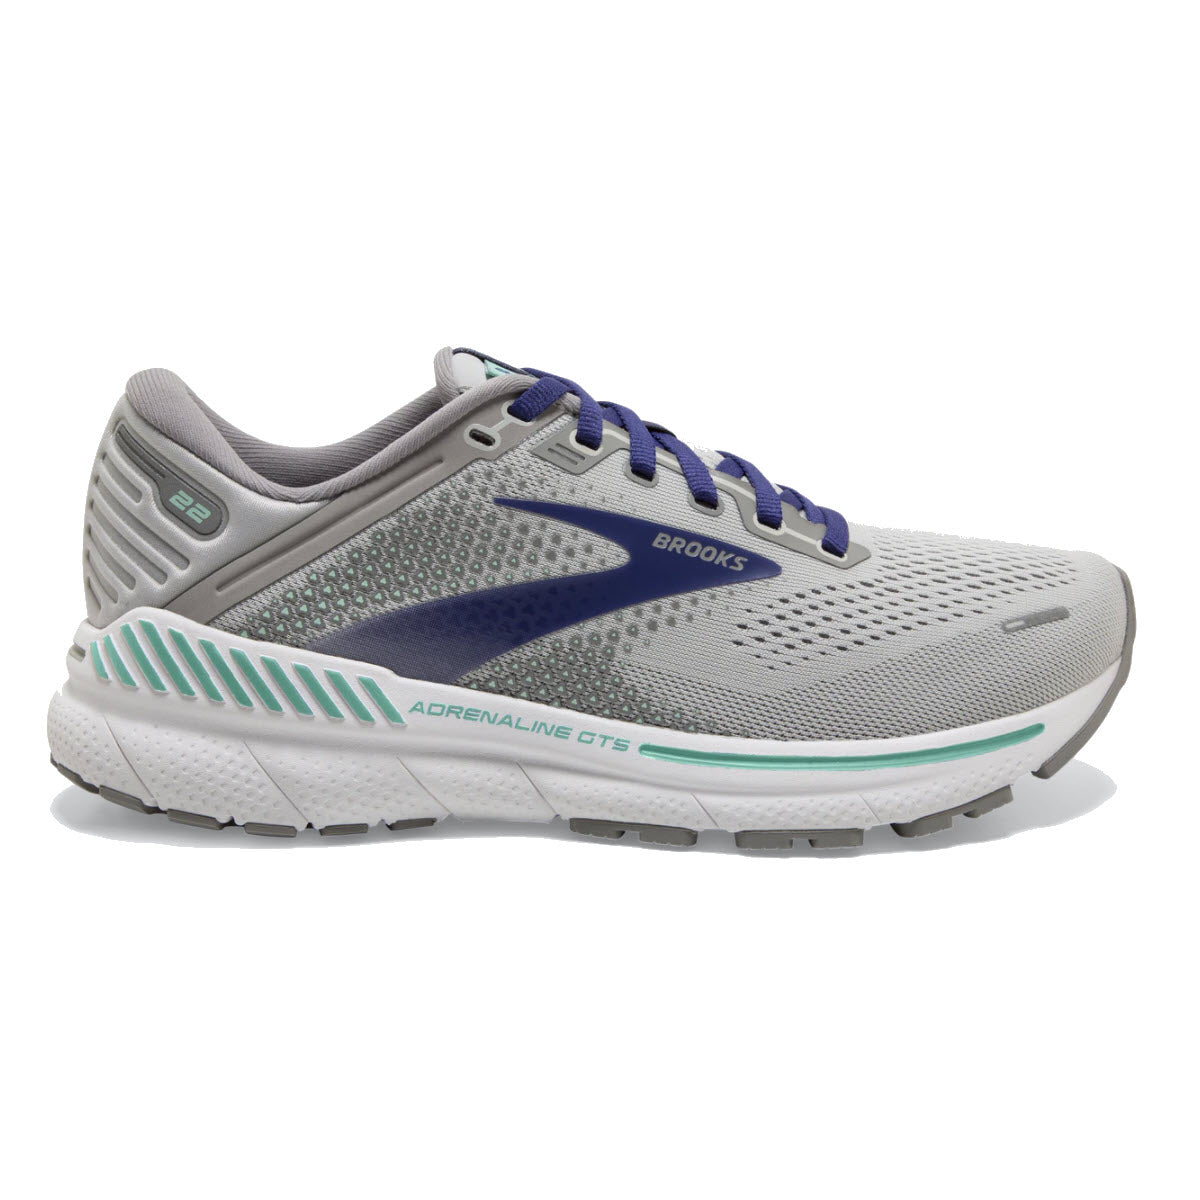 A gray and white Brooks Adrenaline GTS 22 Alloy/Blue/Green running shoe.